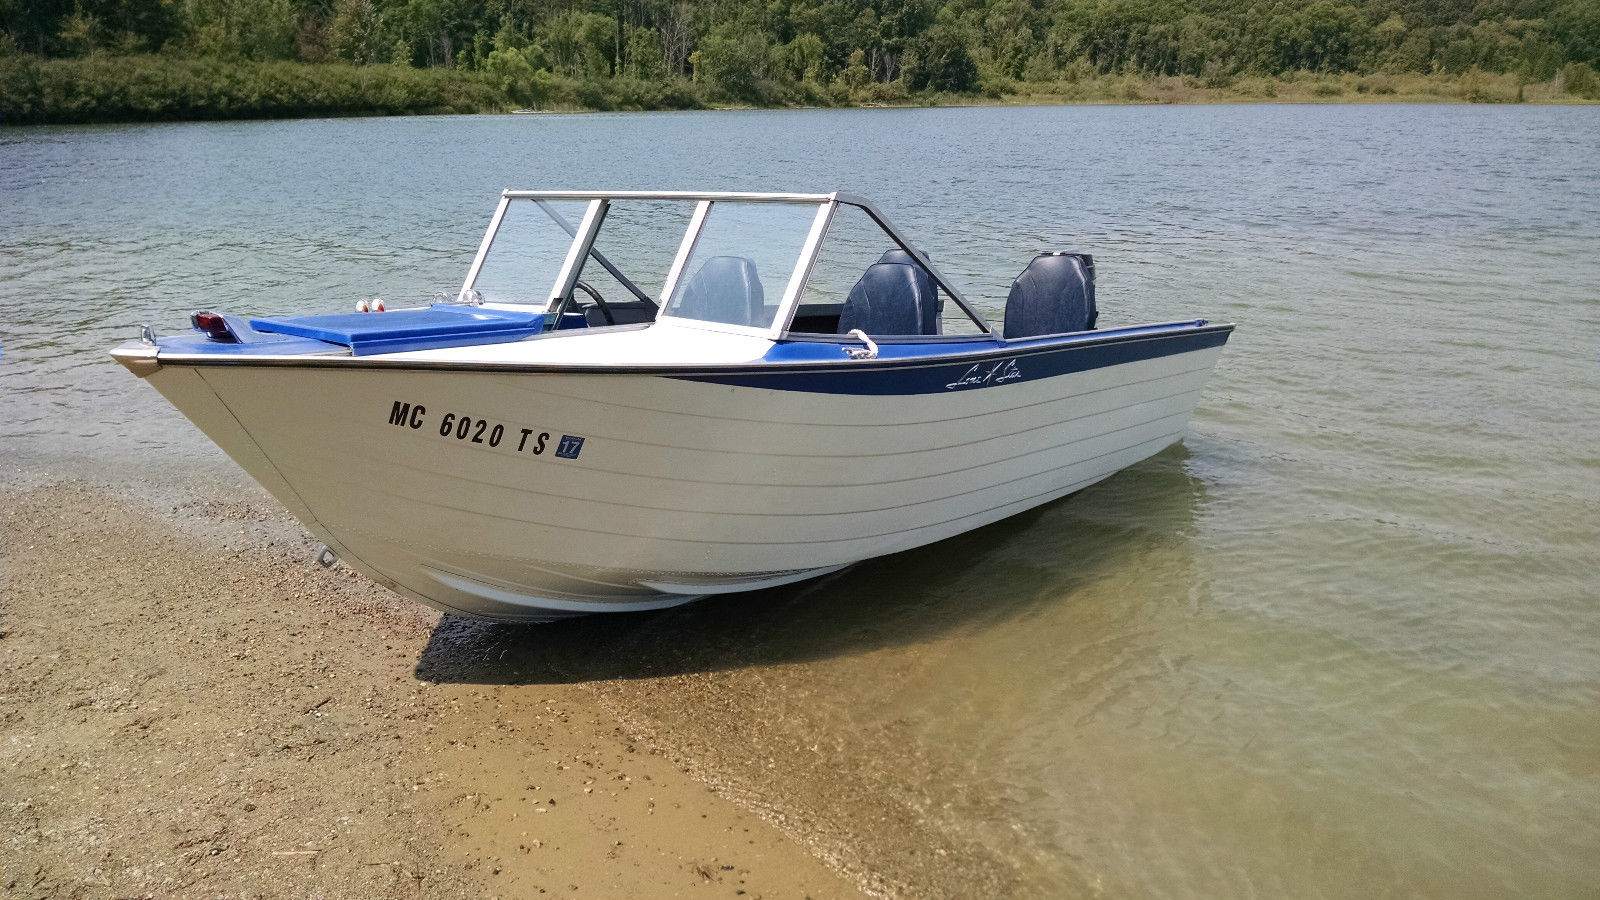 Lone Star Medallion 1965 for sale for $3,000 - Boats-from ...